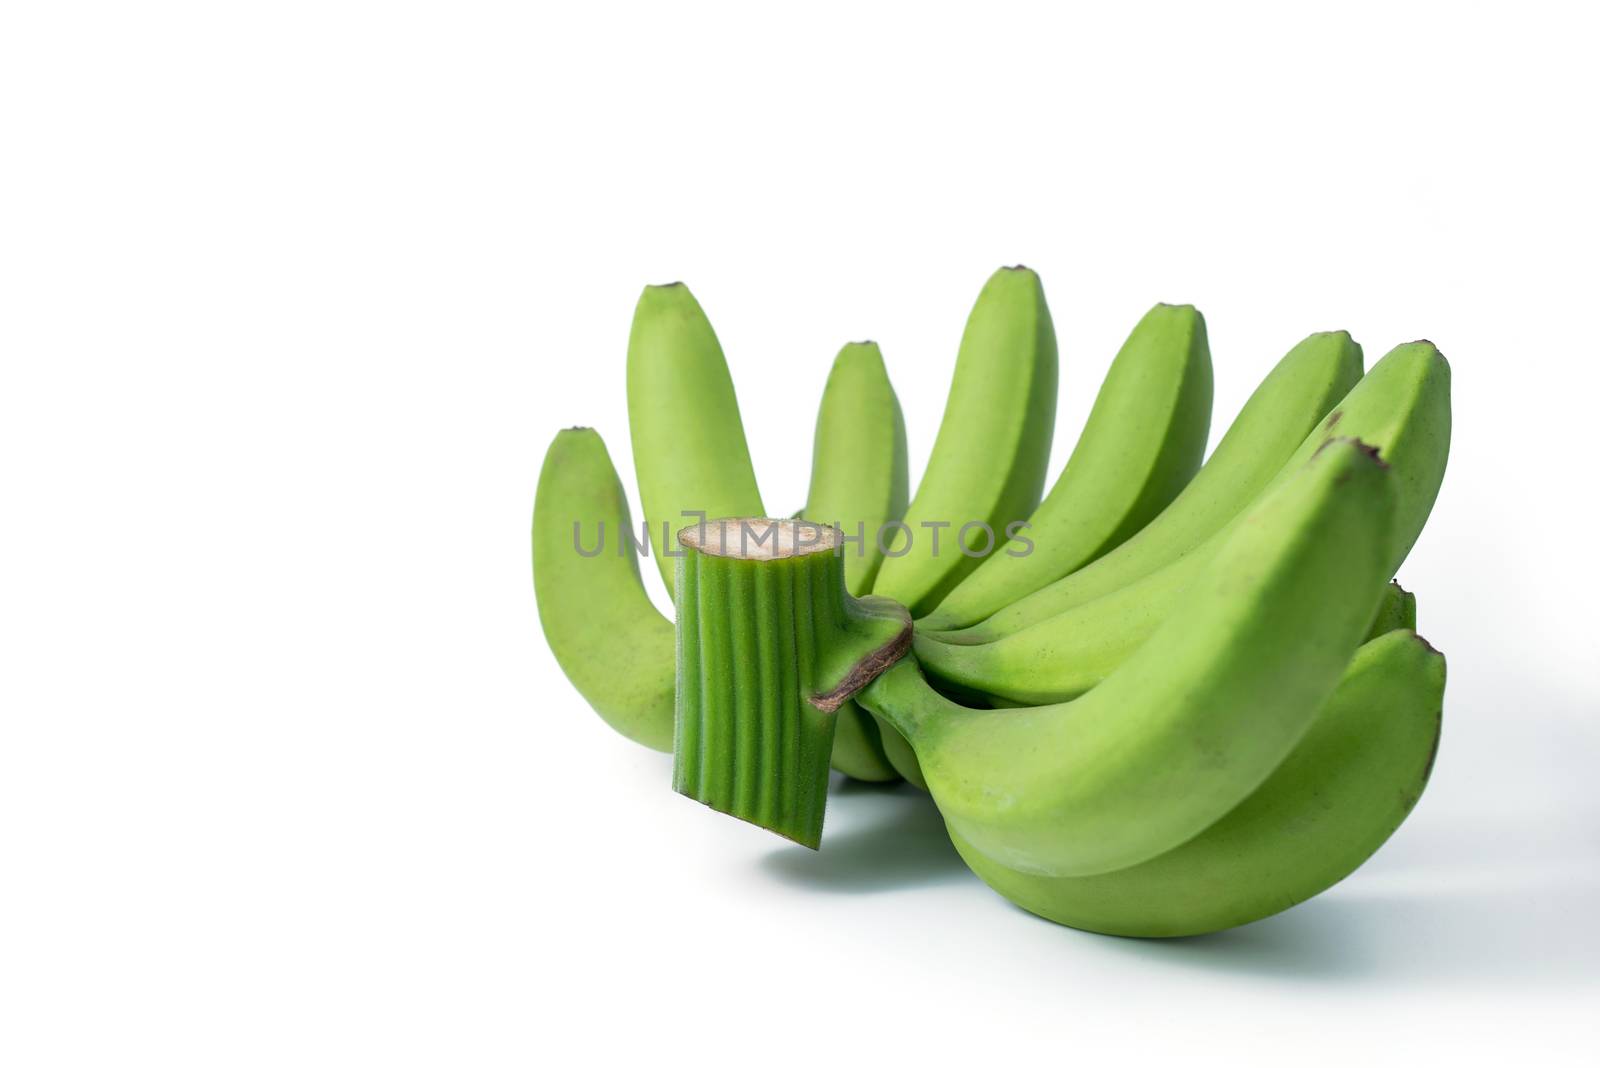 bunch of green bananas by antpkr